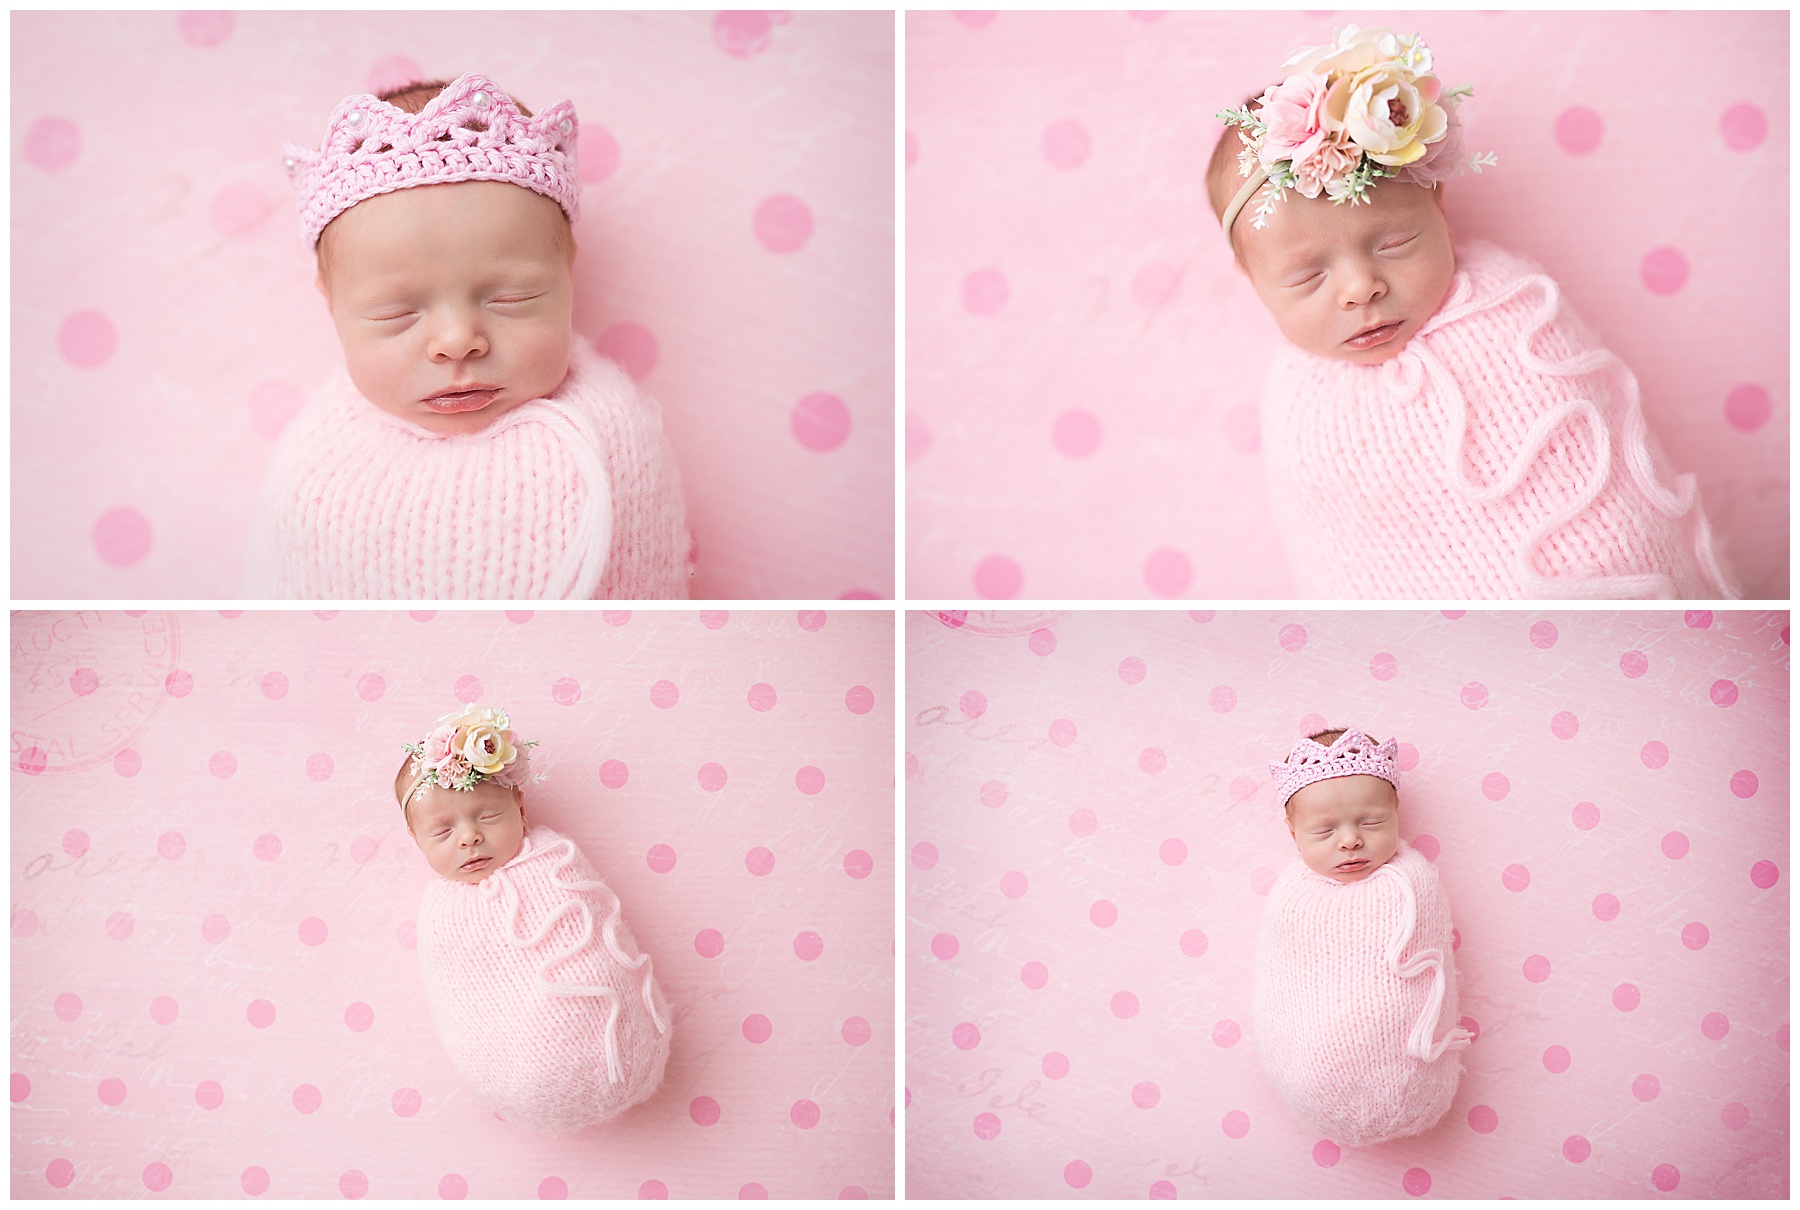 princess crown for the newborn baby girl during her photo session